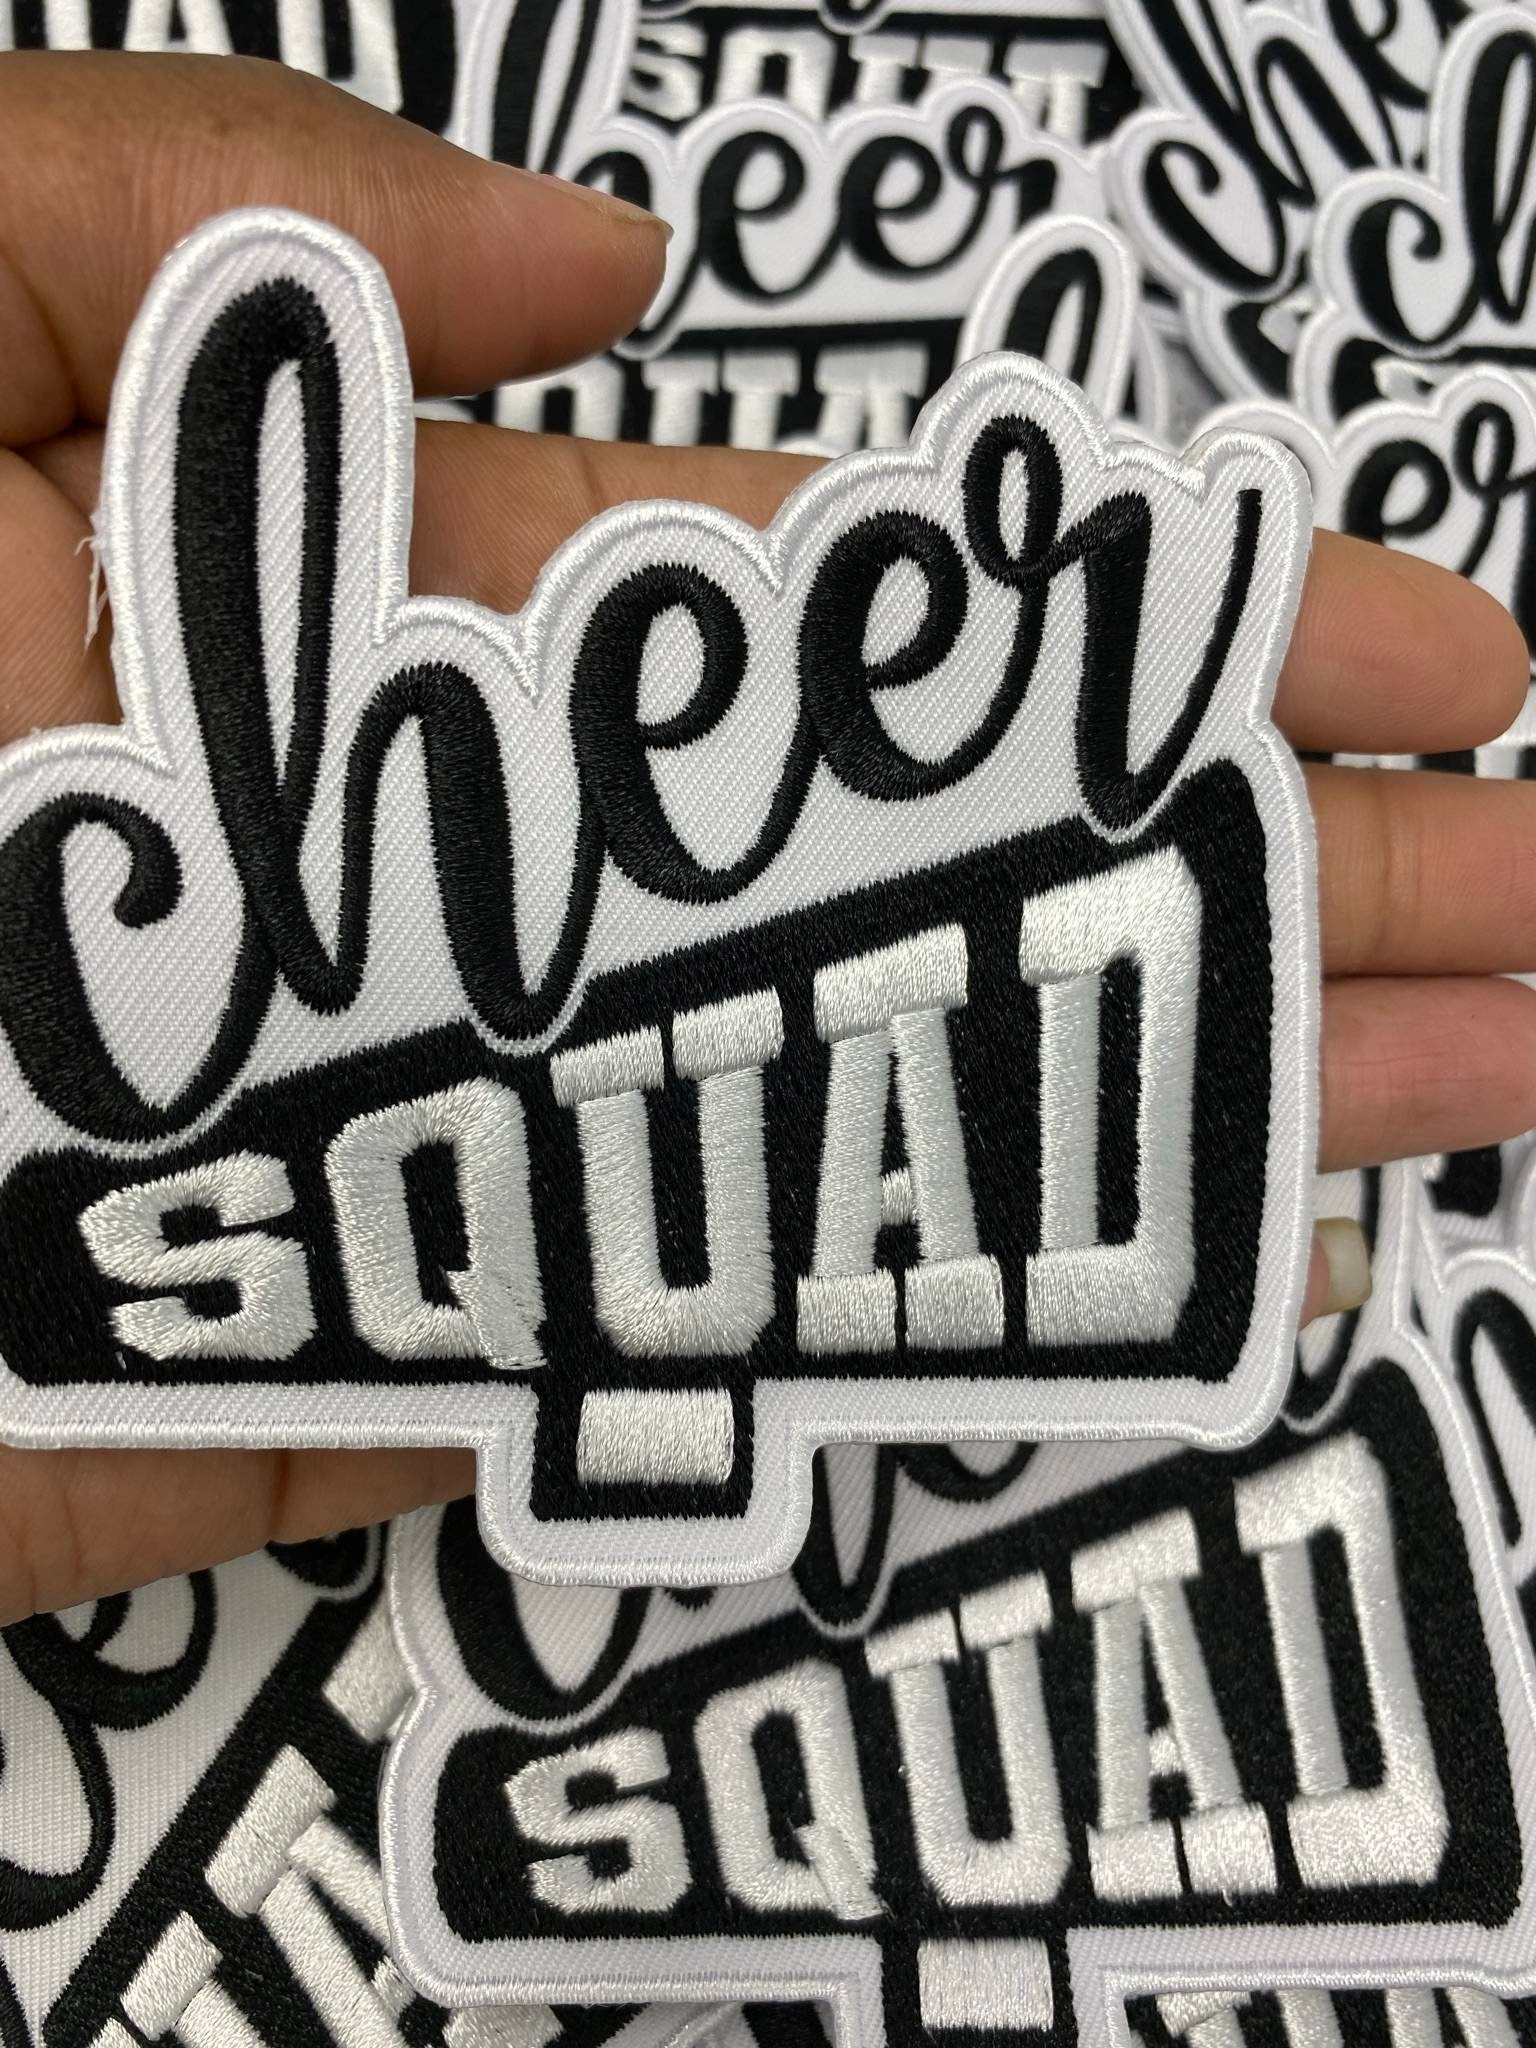 New Arrival,Cheer Squad Black/White, Cheerleading Patch, Iron-on App –  PatchPartyClub